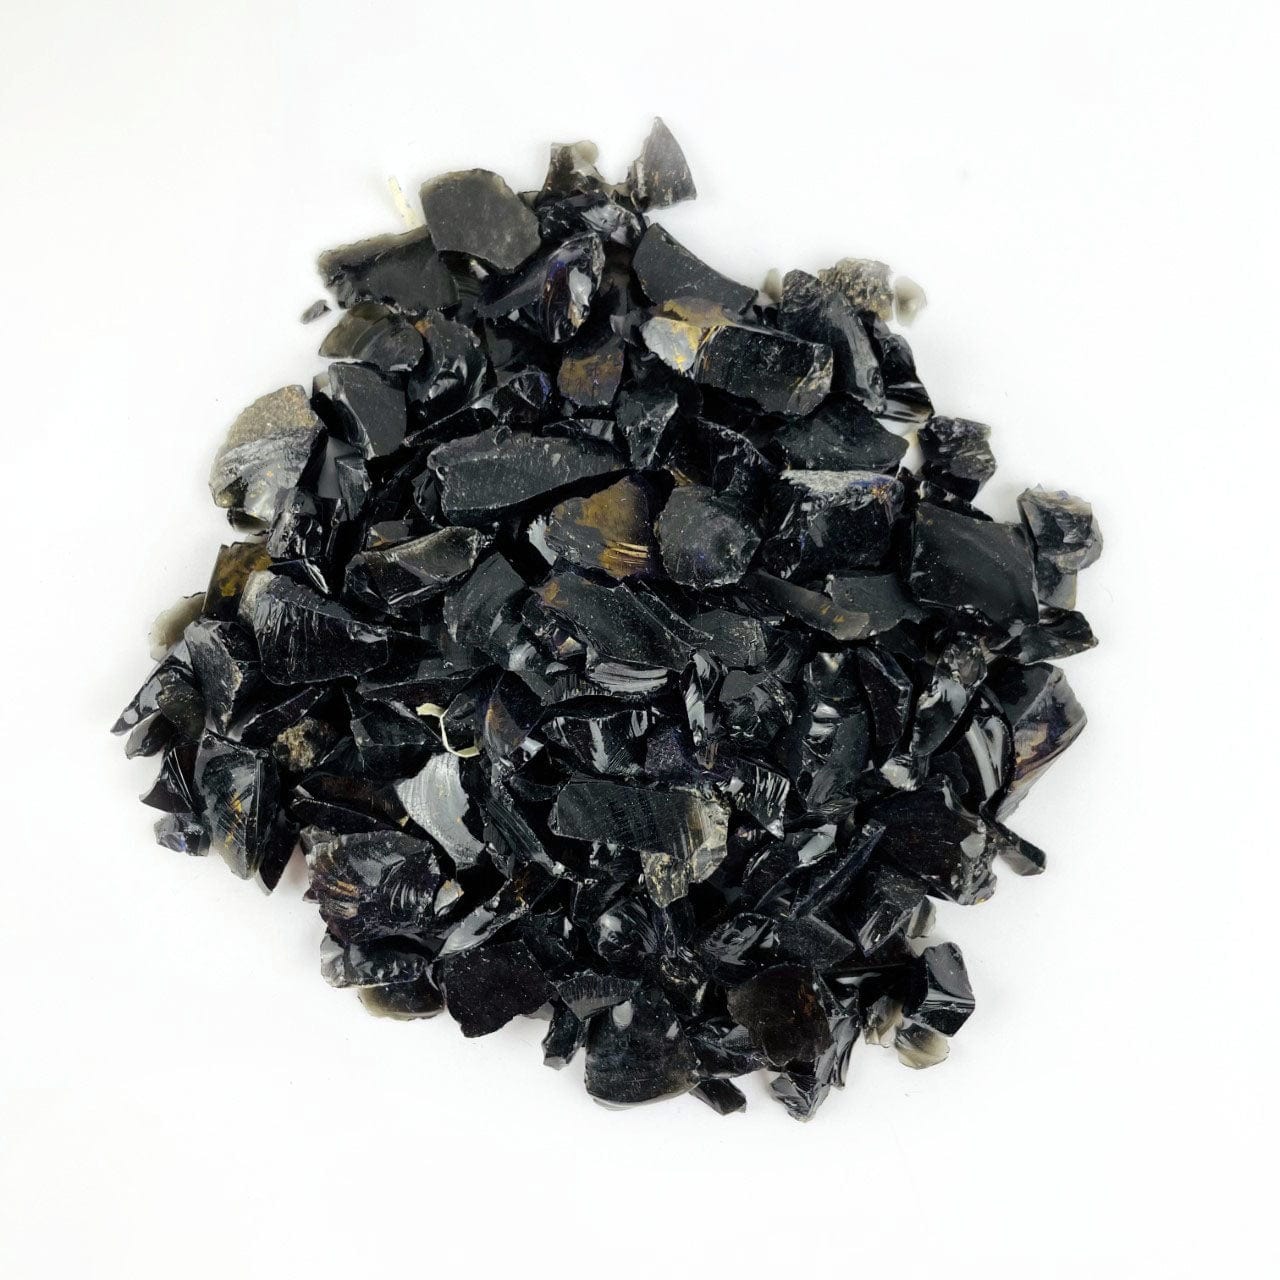 Black Obsidian Stones in a pile for showing amount in box